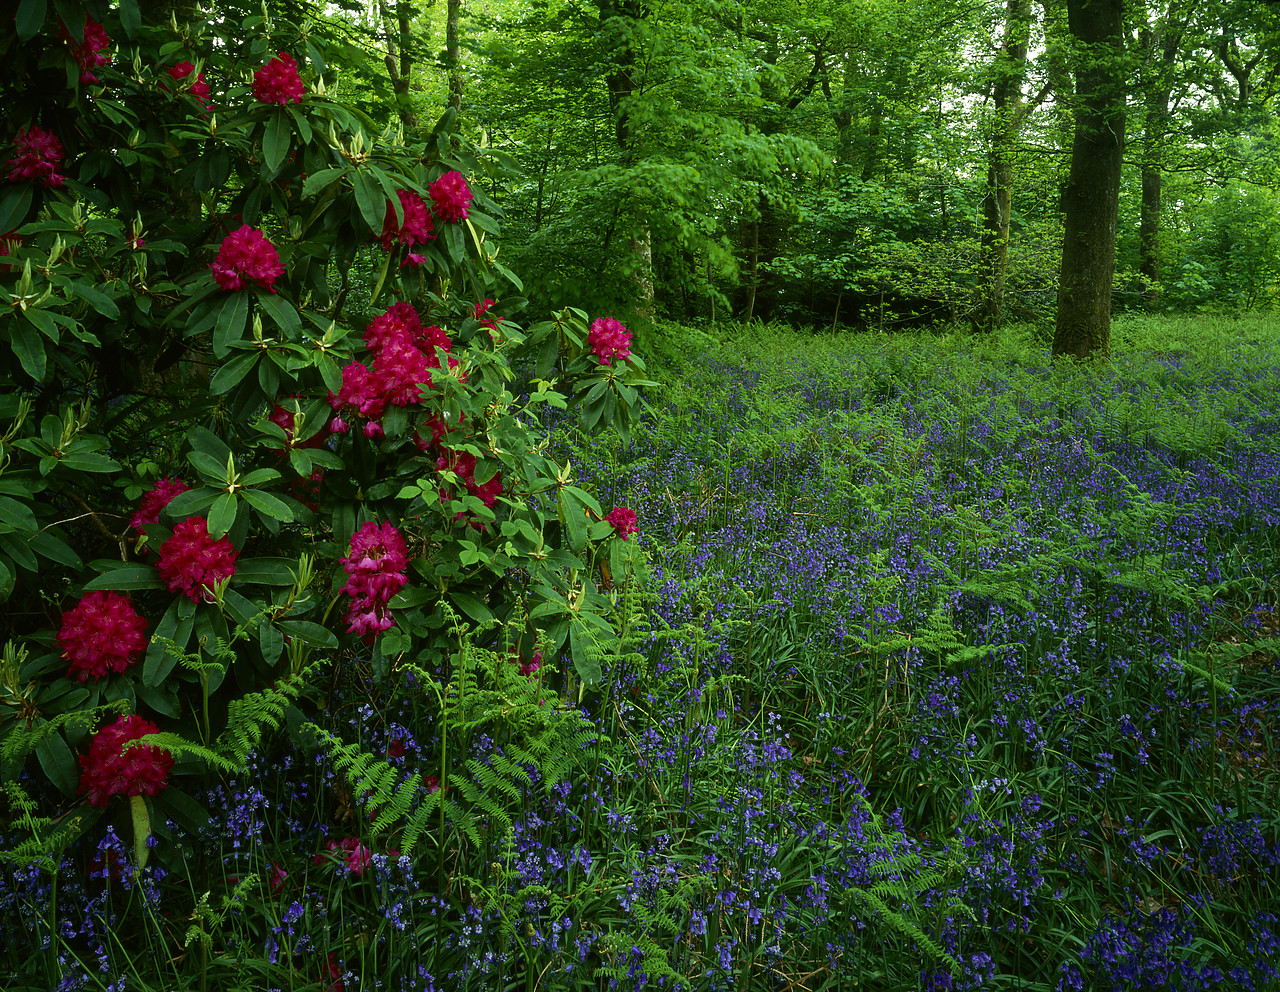 #944605-1 - Rhododendrons in Bluebell Wood, Castle Kennedy Gardens, Dumfries & Galloway, Scotland